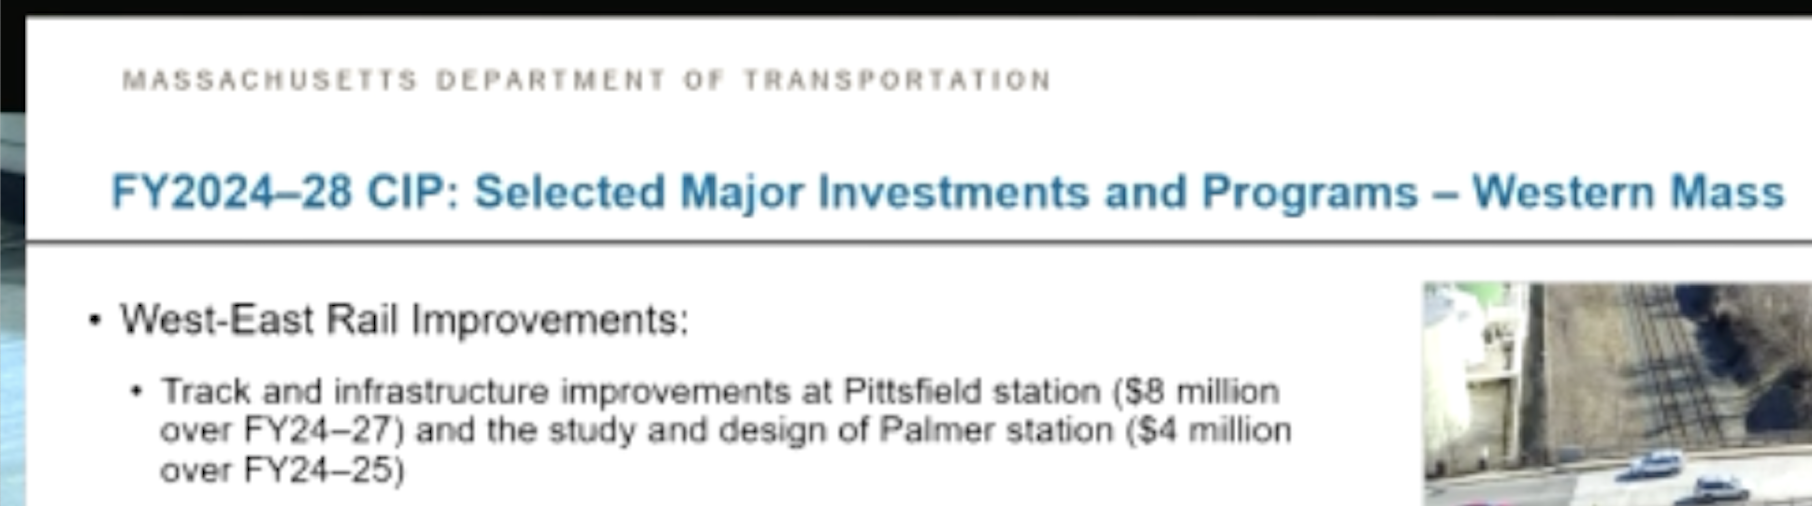 Detail from MassDOT slide "FY2024-28 CIP: Selected Major Investments and Programs -- Western Mass," listing "West-East Rail Improvements: Track and infrastructure improvements at Pittsfield station ($8 million over FY24-27) and the study and design of Palmer station ($4 million over FY24-25)." From presentation by David Mohler, MassDOT Office of Transportation Planning, at Board of Directors meeting on 7/19/23.